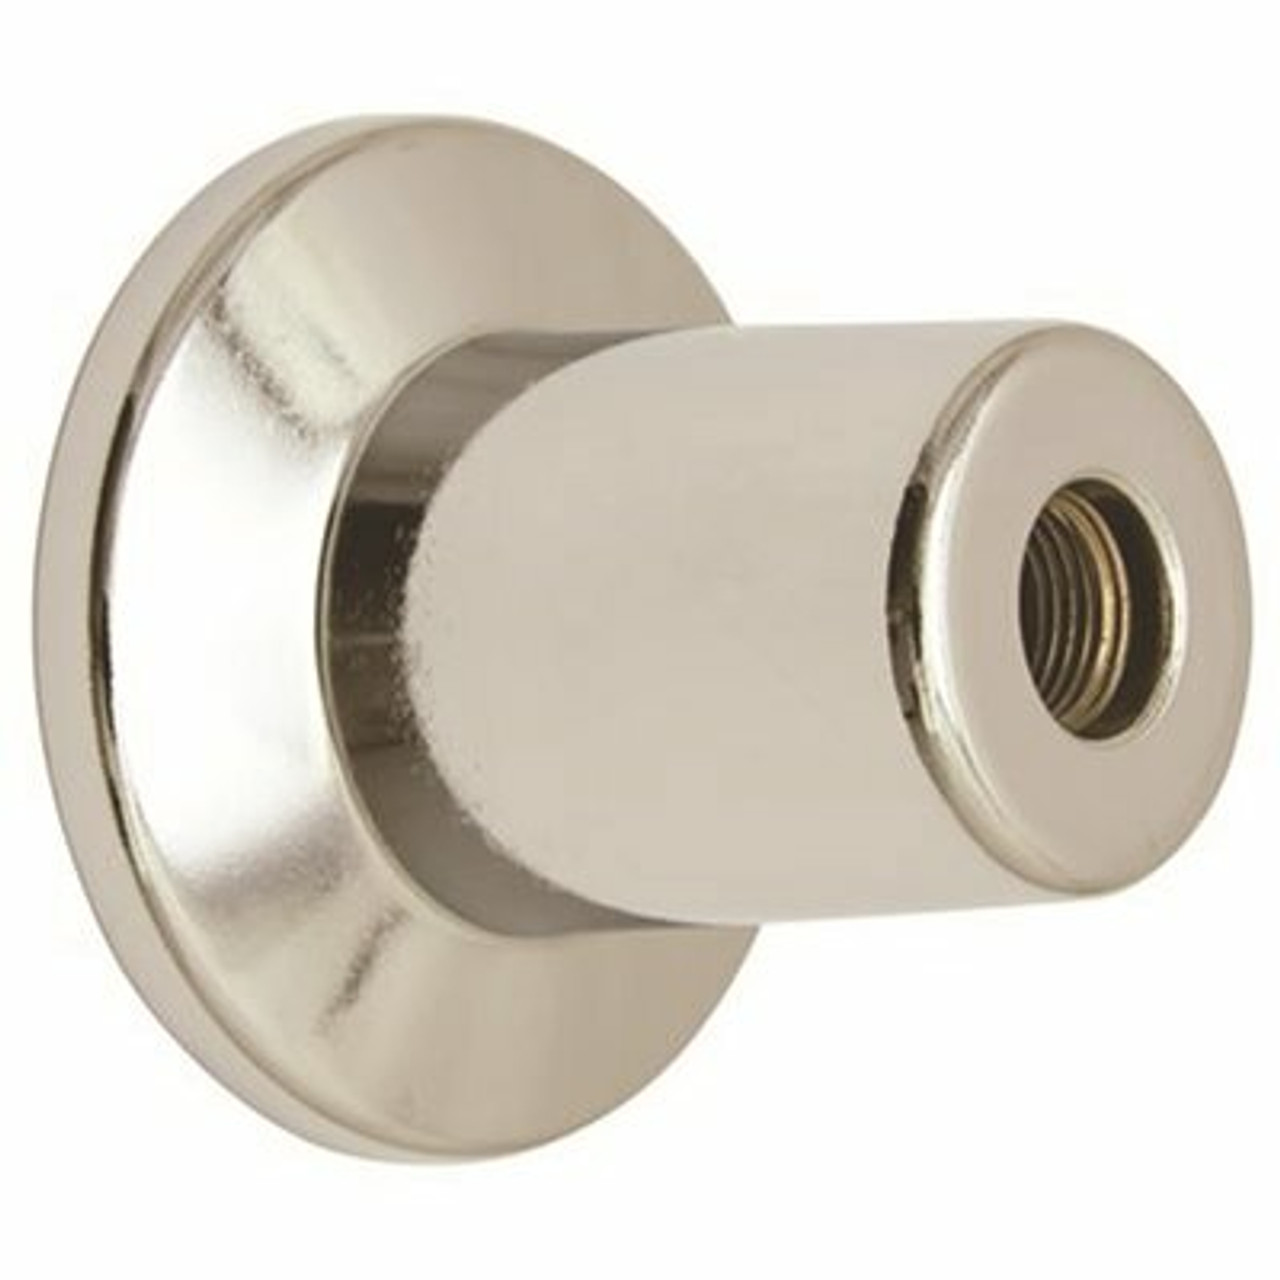 Proplus Shower Escutcheon For Central, Chrome Plated